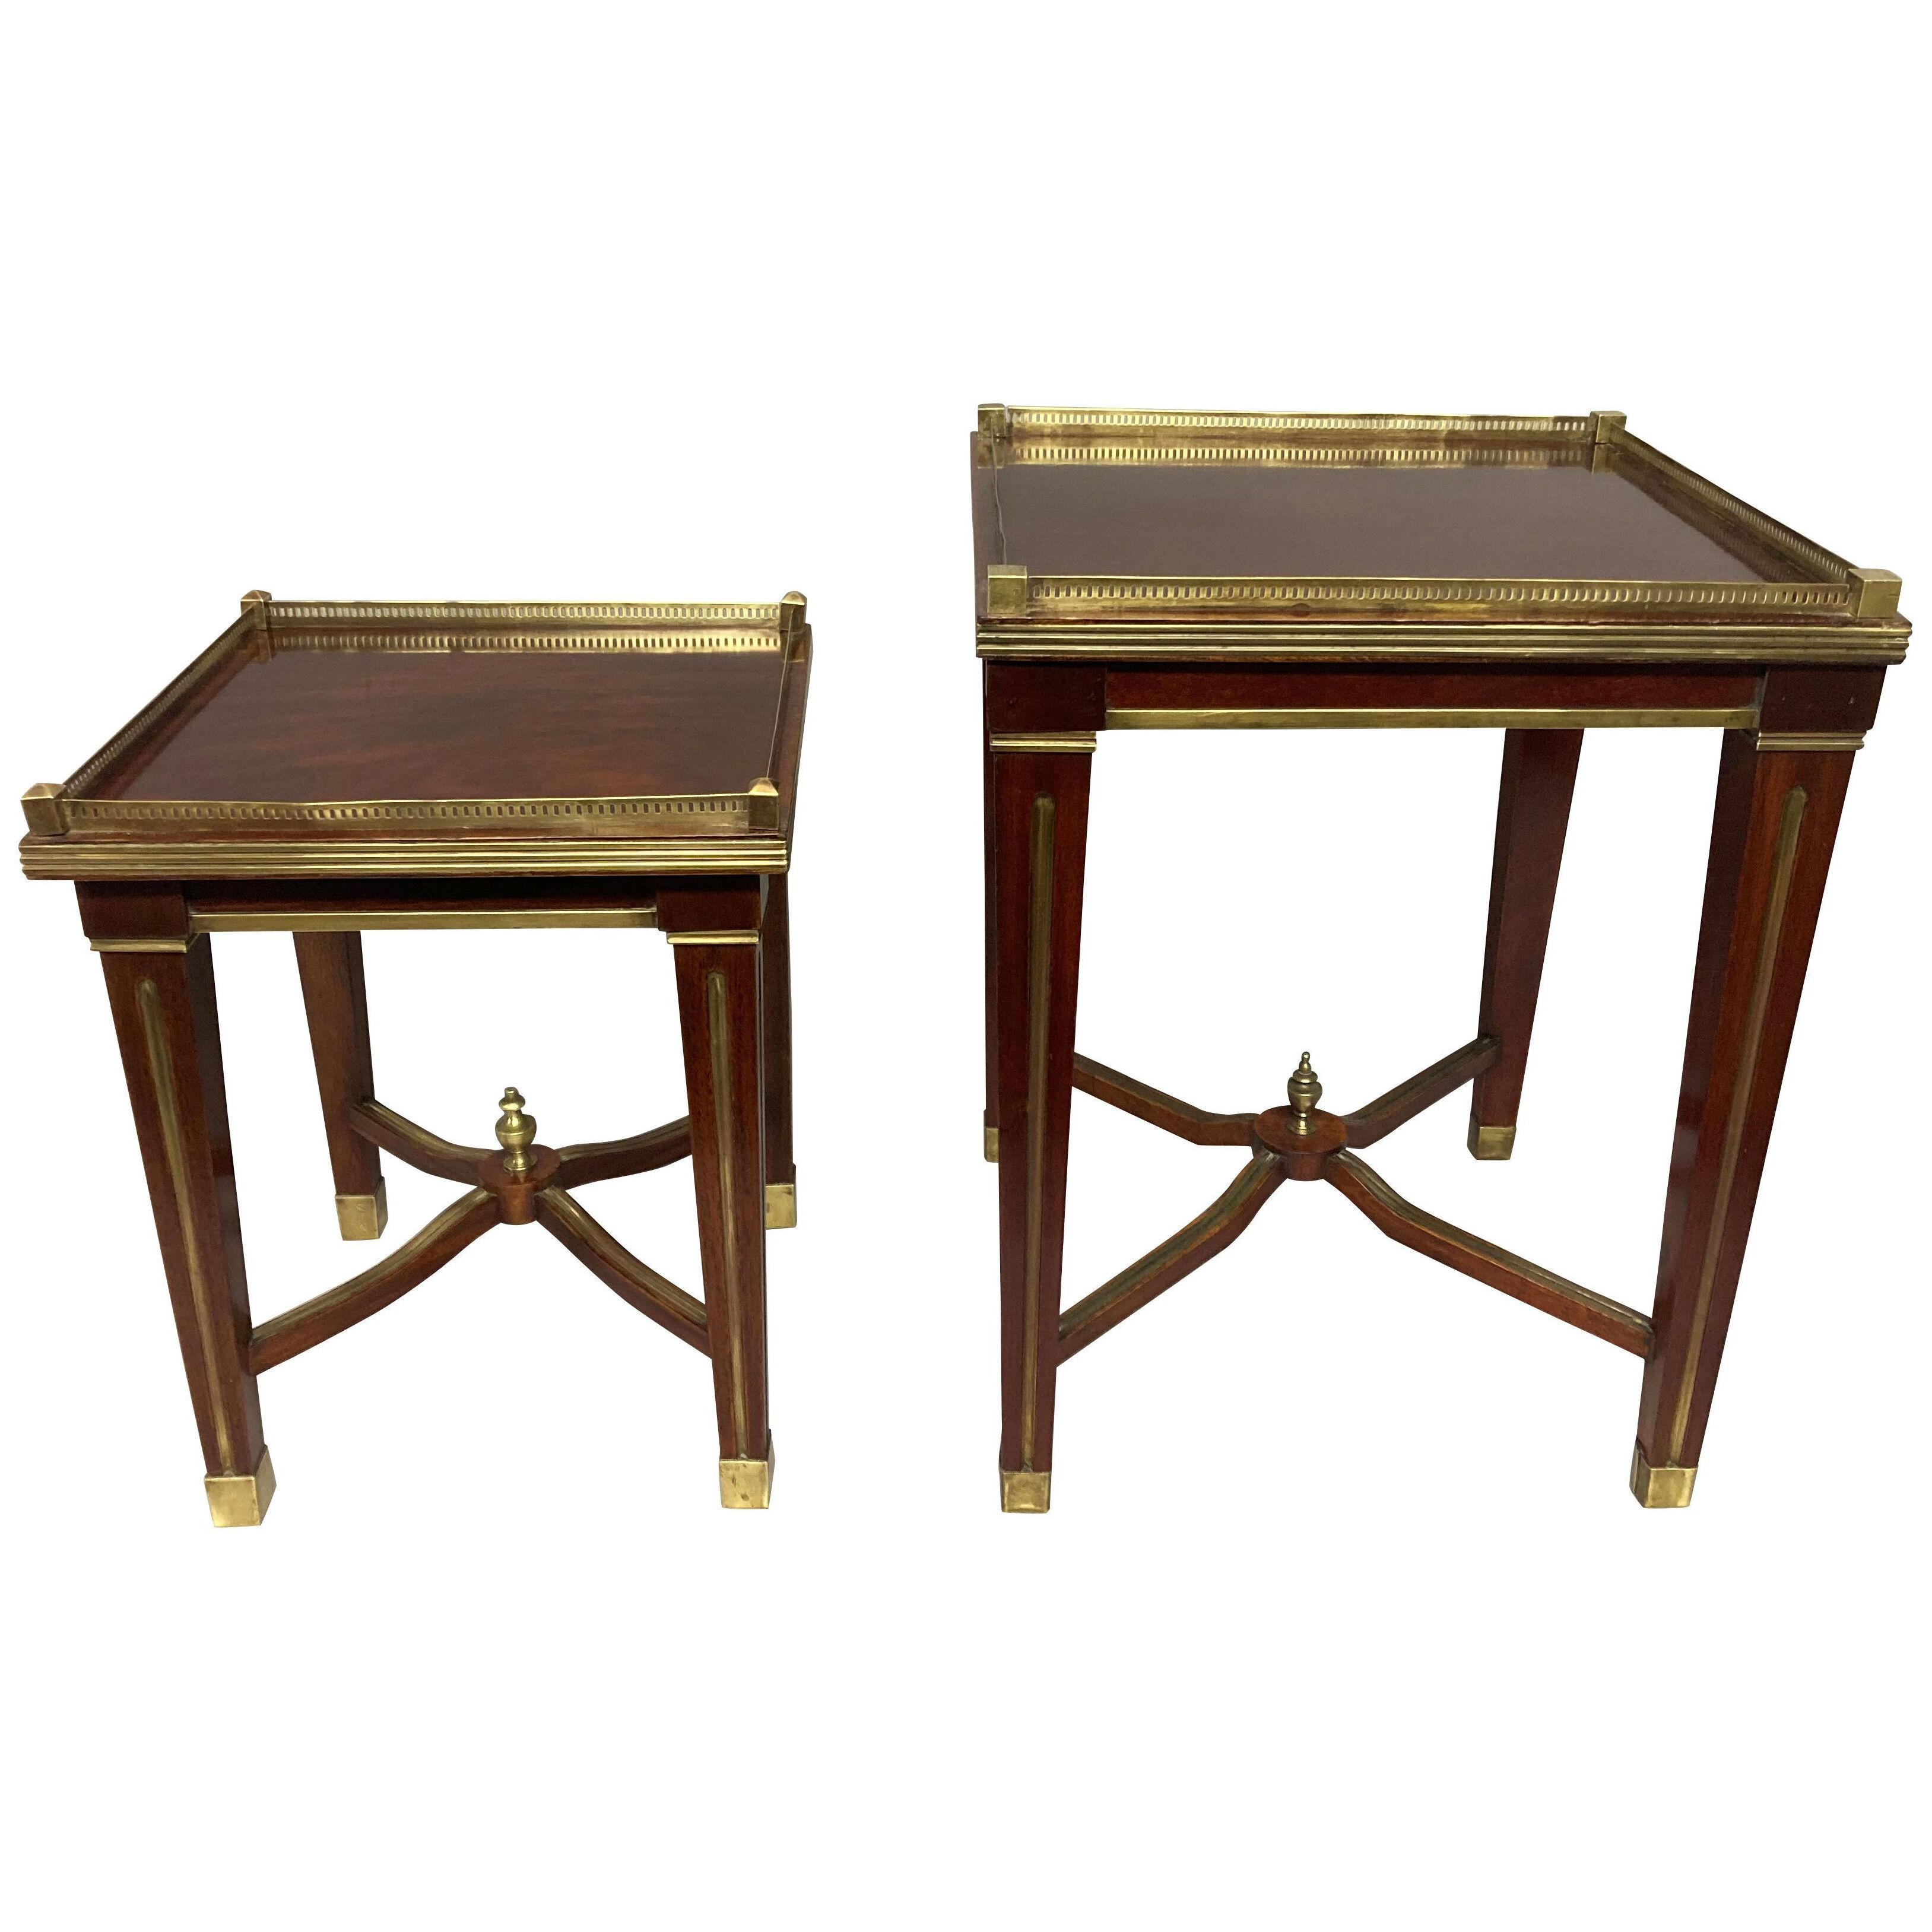 A PAIR OF RUSSIAN NEO-CLASSICAL TABLES FROM THE PETEROF PALACE